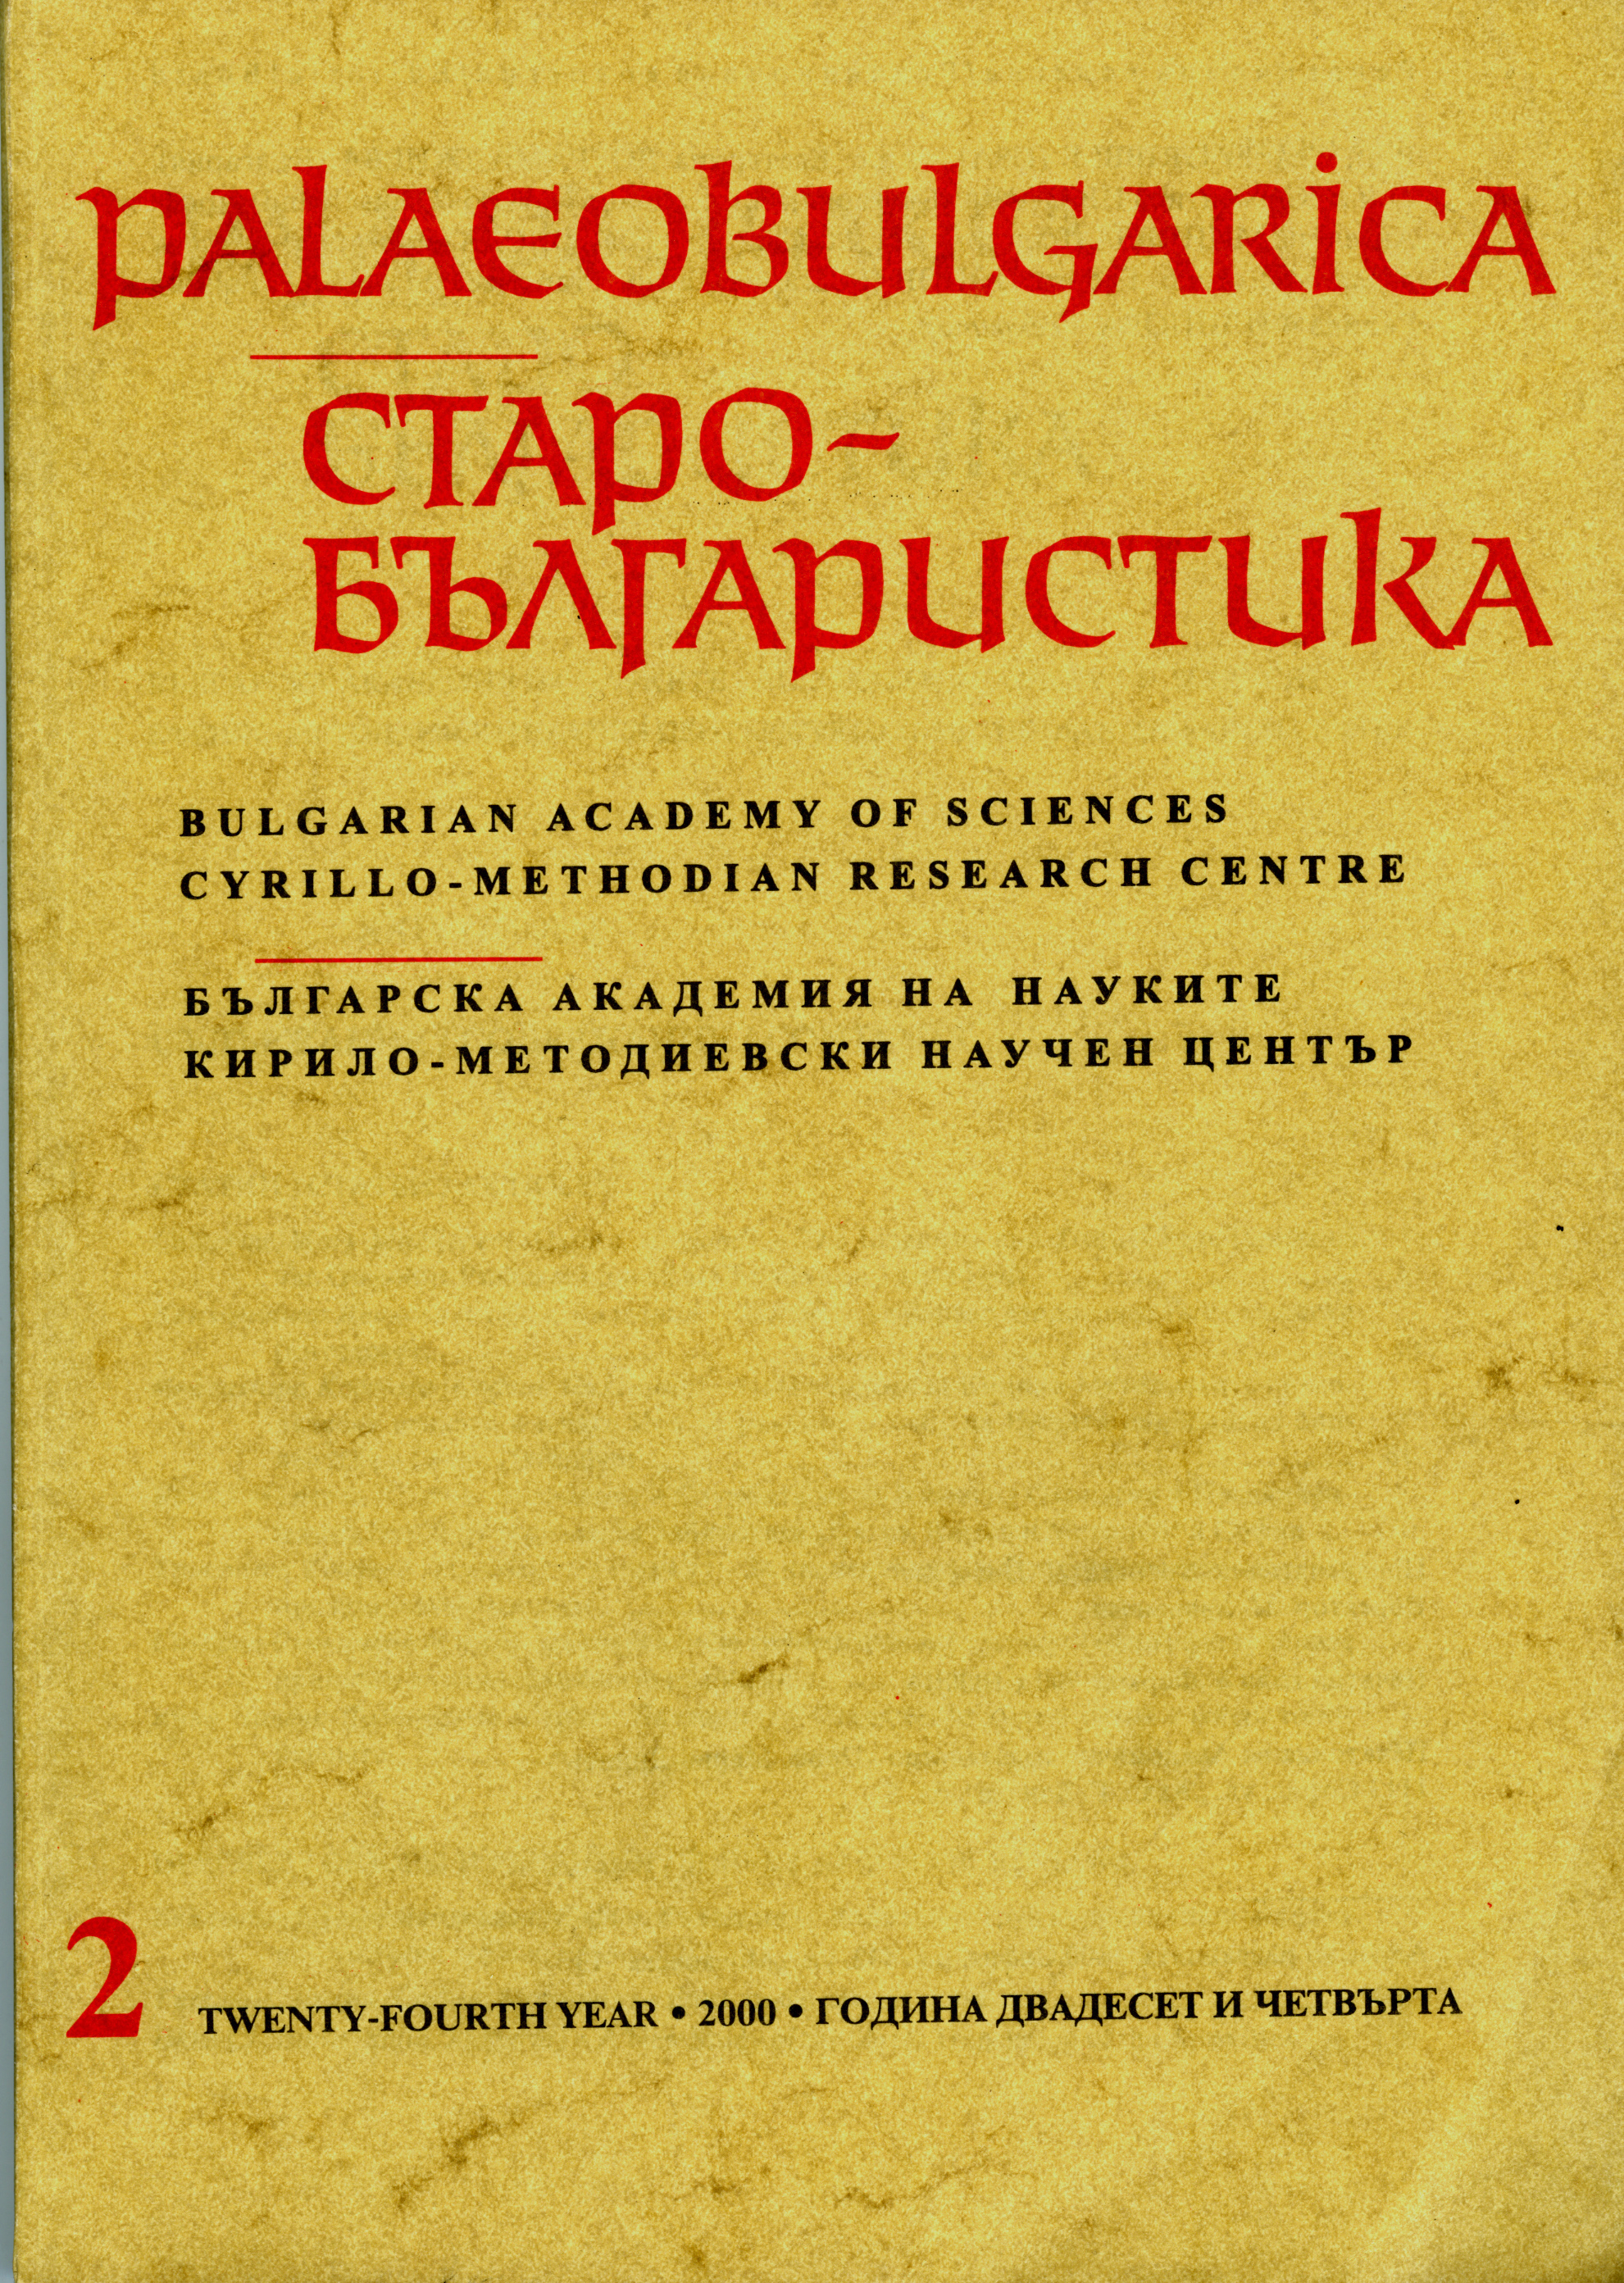 The Linguistic and Textual Peculiarities of the Glagolitic Psalter auctioned at Christie's on 3 June 1998 Cover Image